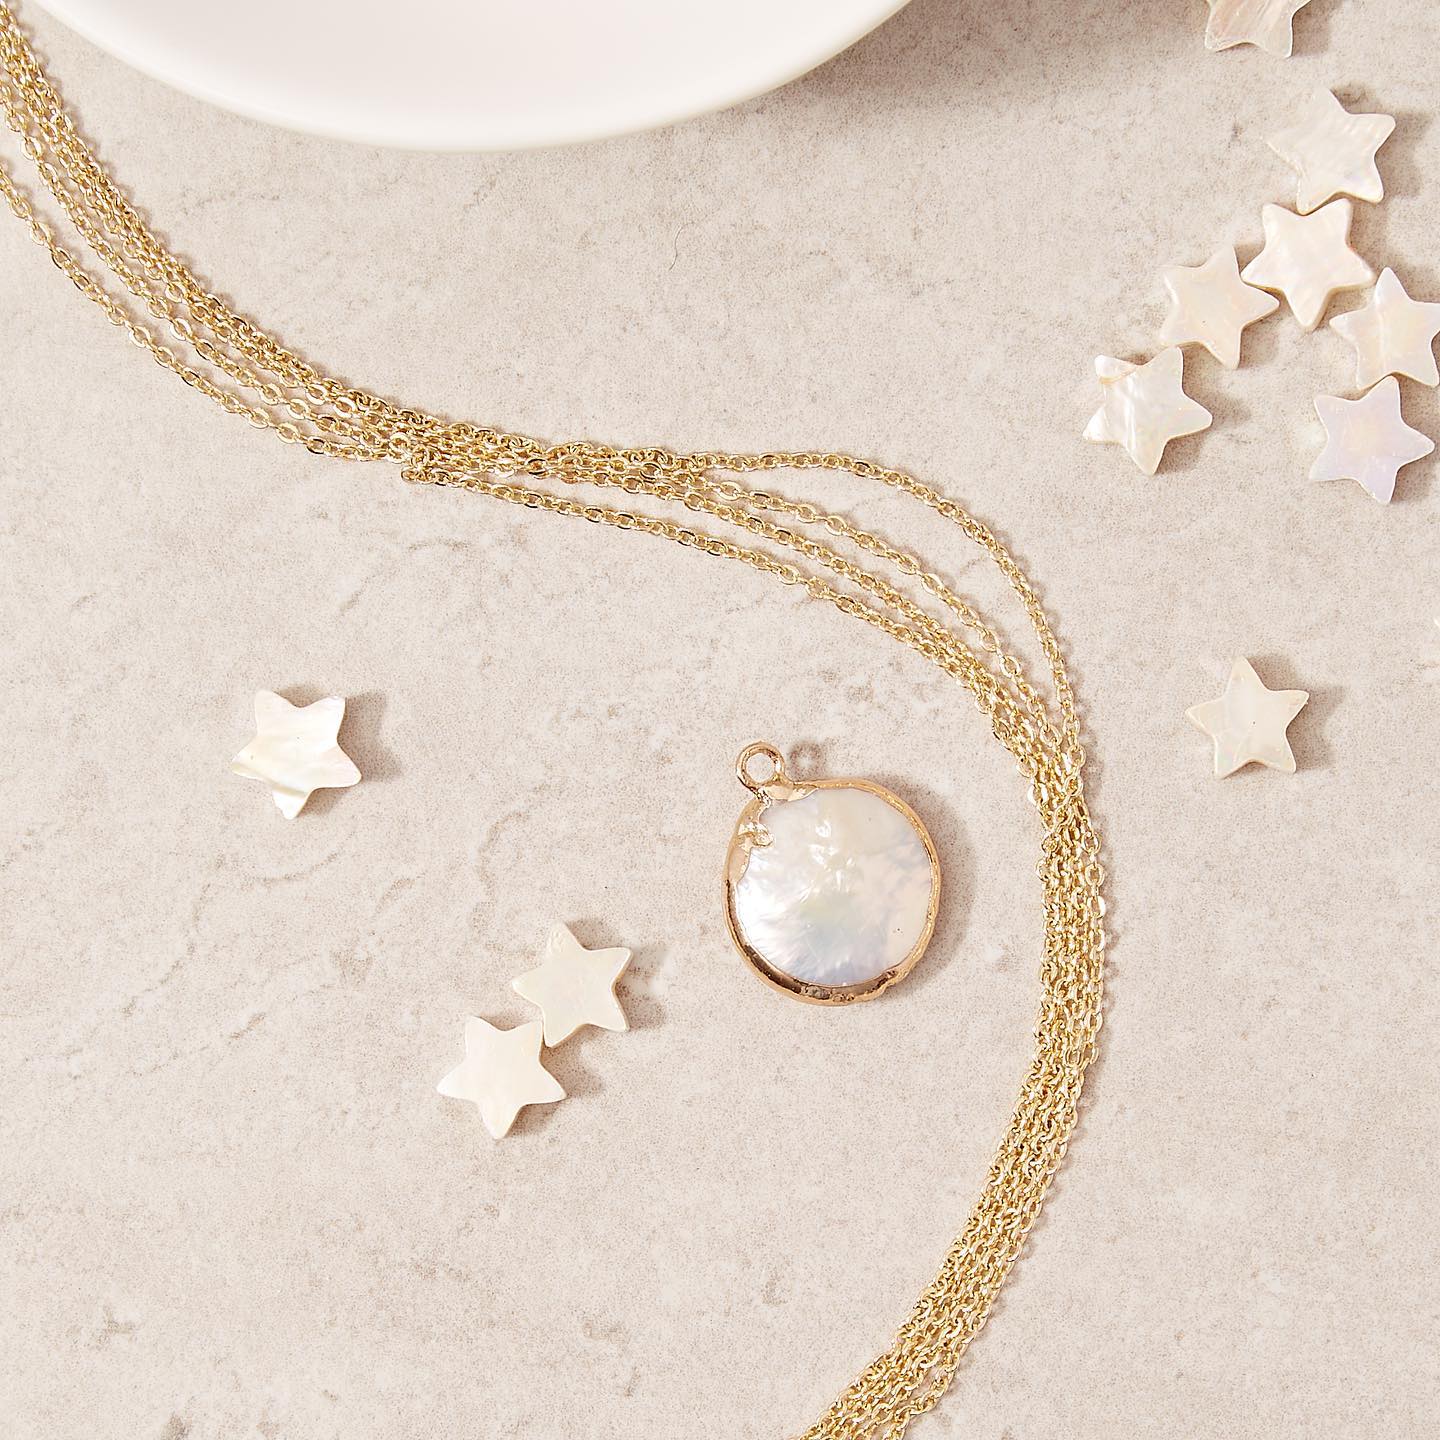 A picture of a pearl pendant on sand colored ground with star beads surrounding it and a gold chain